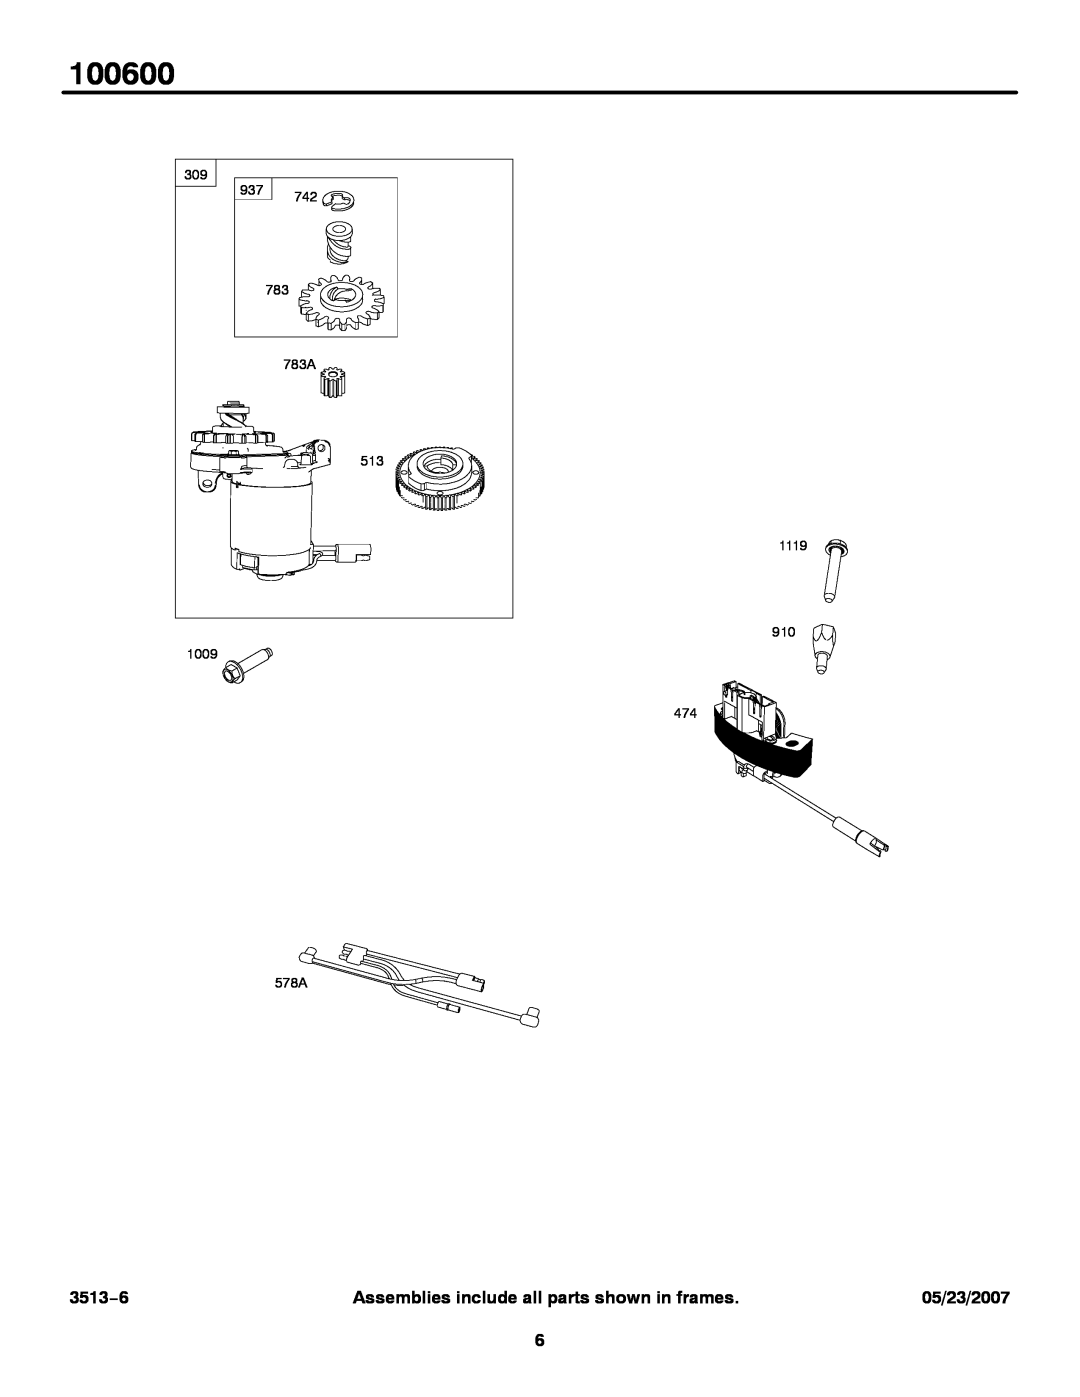 Briggs & Stratton 100600 3513−6, Assemblies include all parts shown in frames, 05/23/2007, 783A 513 1119 910 1009 474 578A 